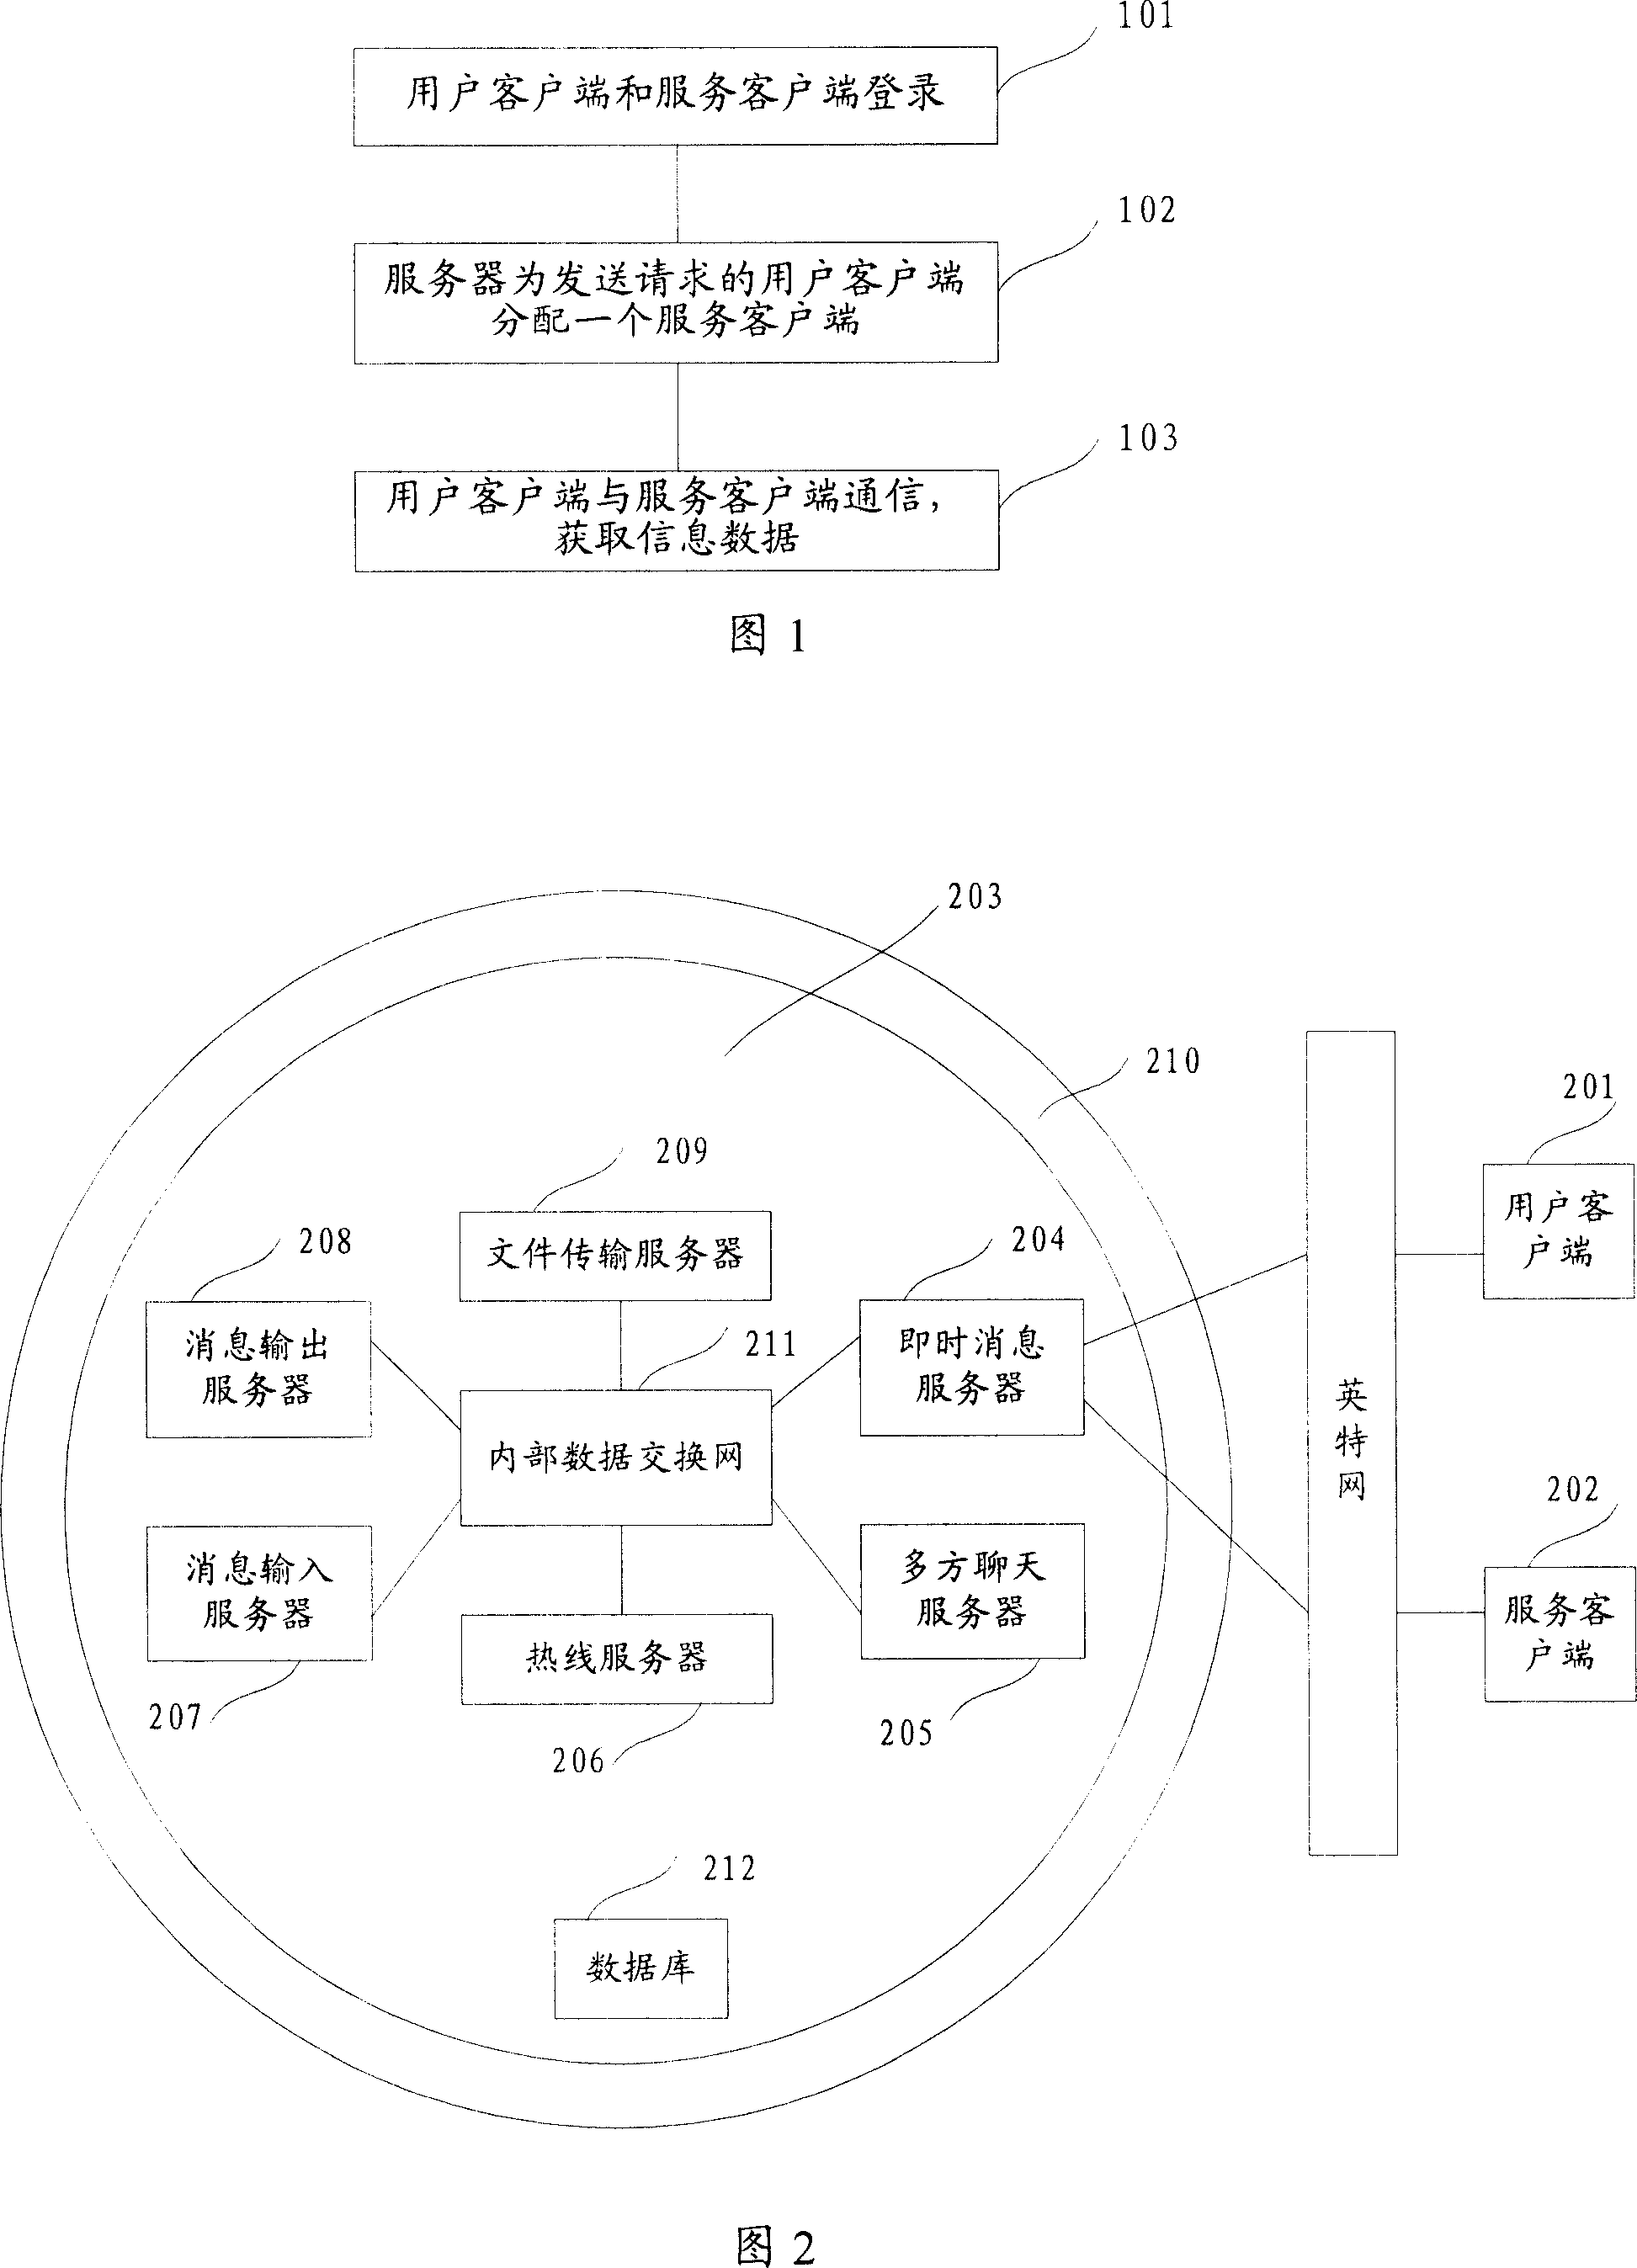 An information service method and system in instant communication